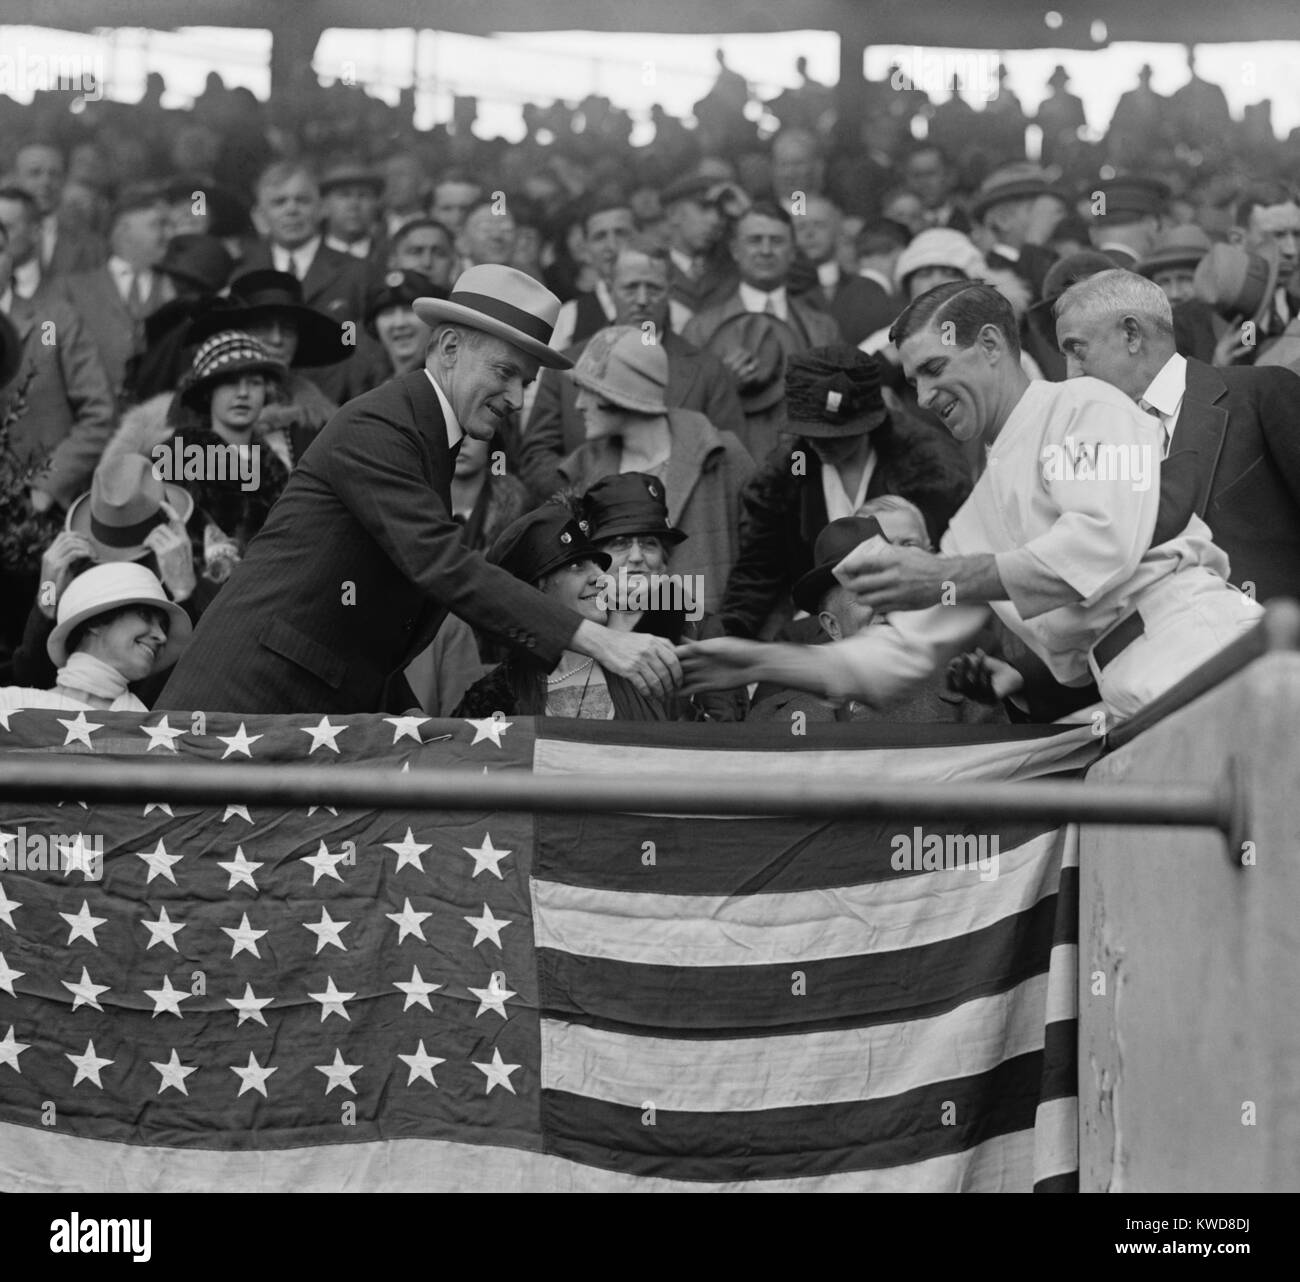 Bucky Harris presents President Calvin Coolidge with baseball used to open the 1924 World Series. Oct. 4, 1924. Senators' manager Harris led his team to it's first and only World Championship. (BSLOC 2015 17 43) Stock Photo